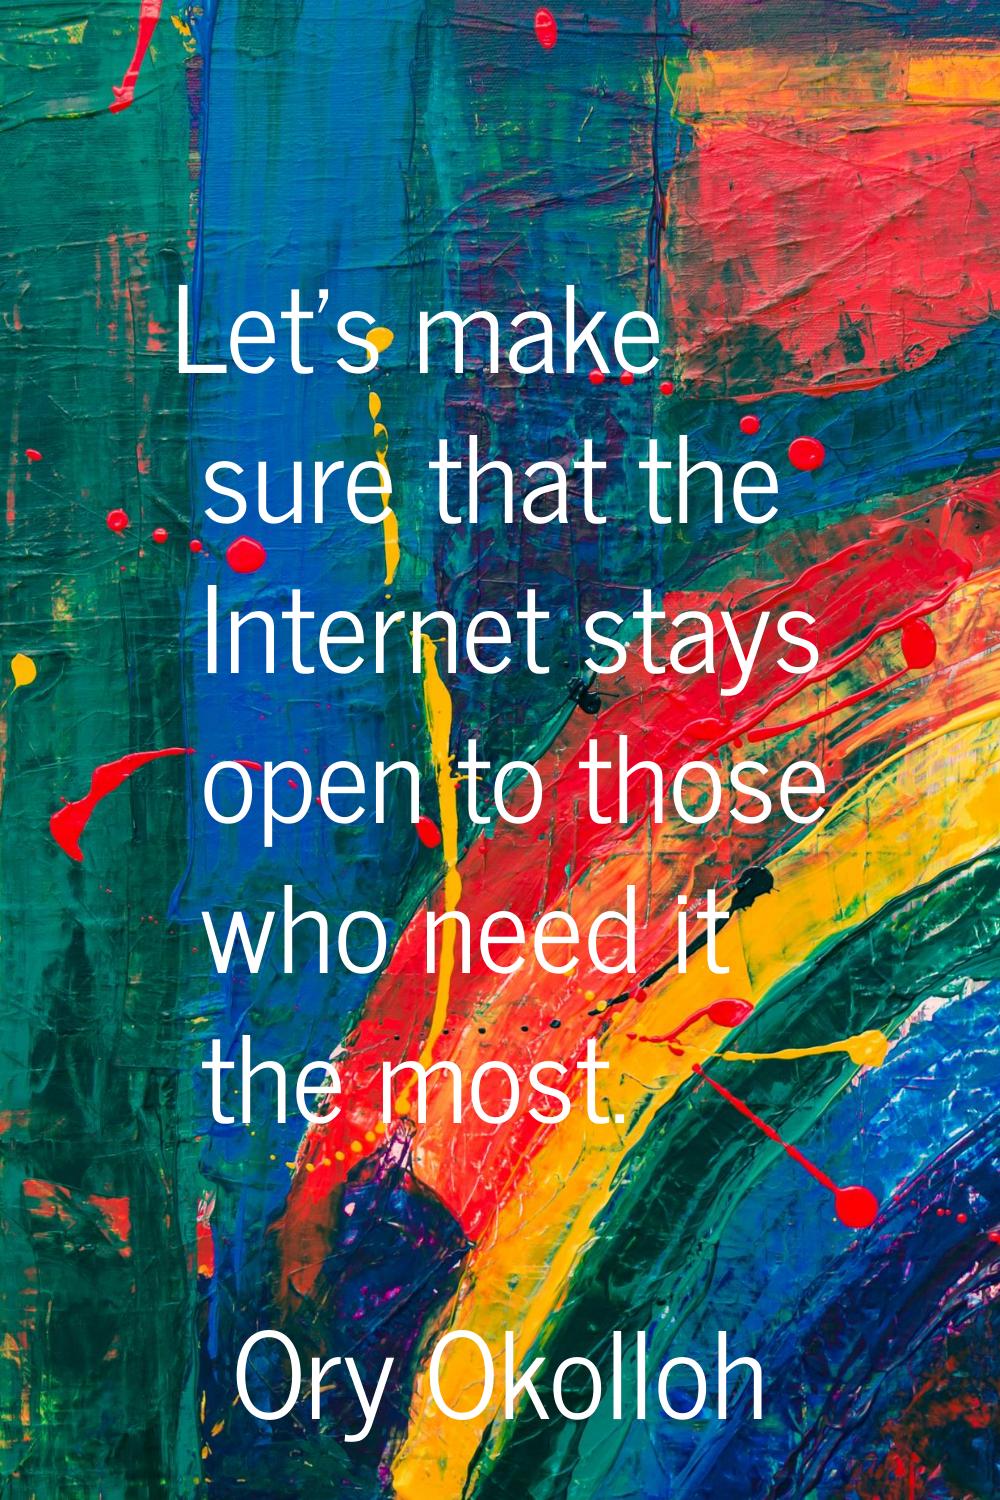 Let's make sure that the Internet stays open to those who need it the most.